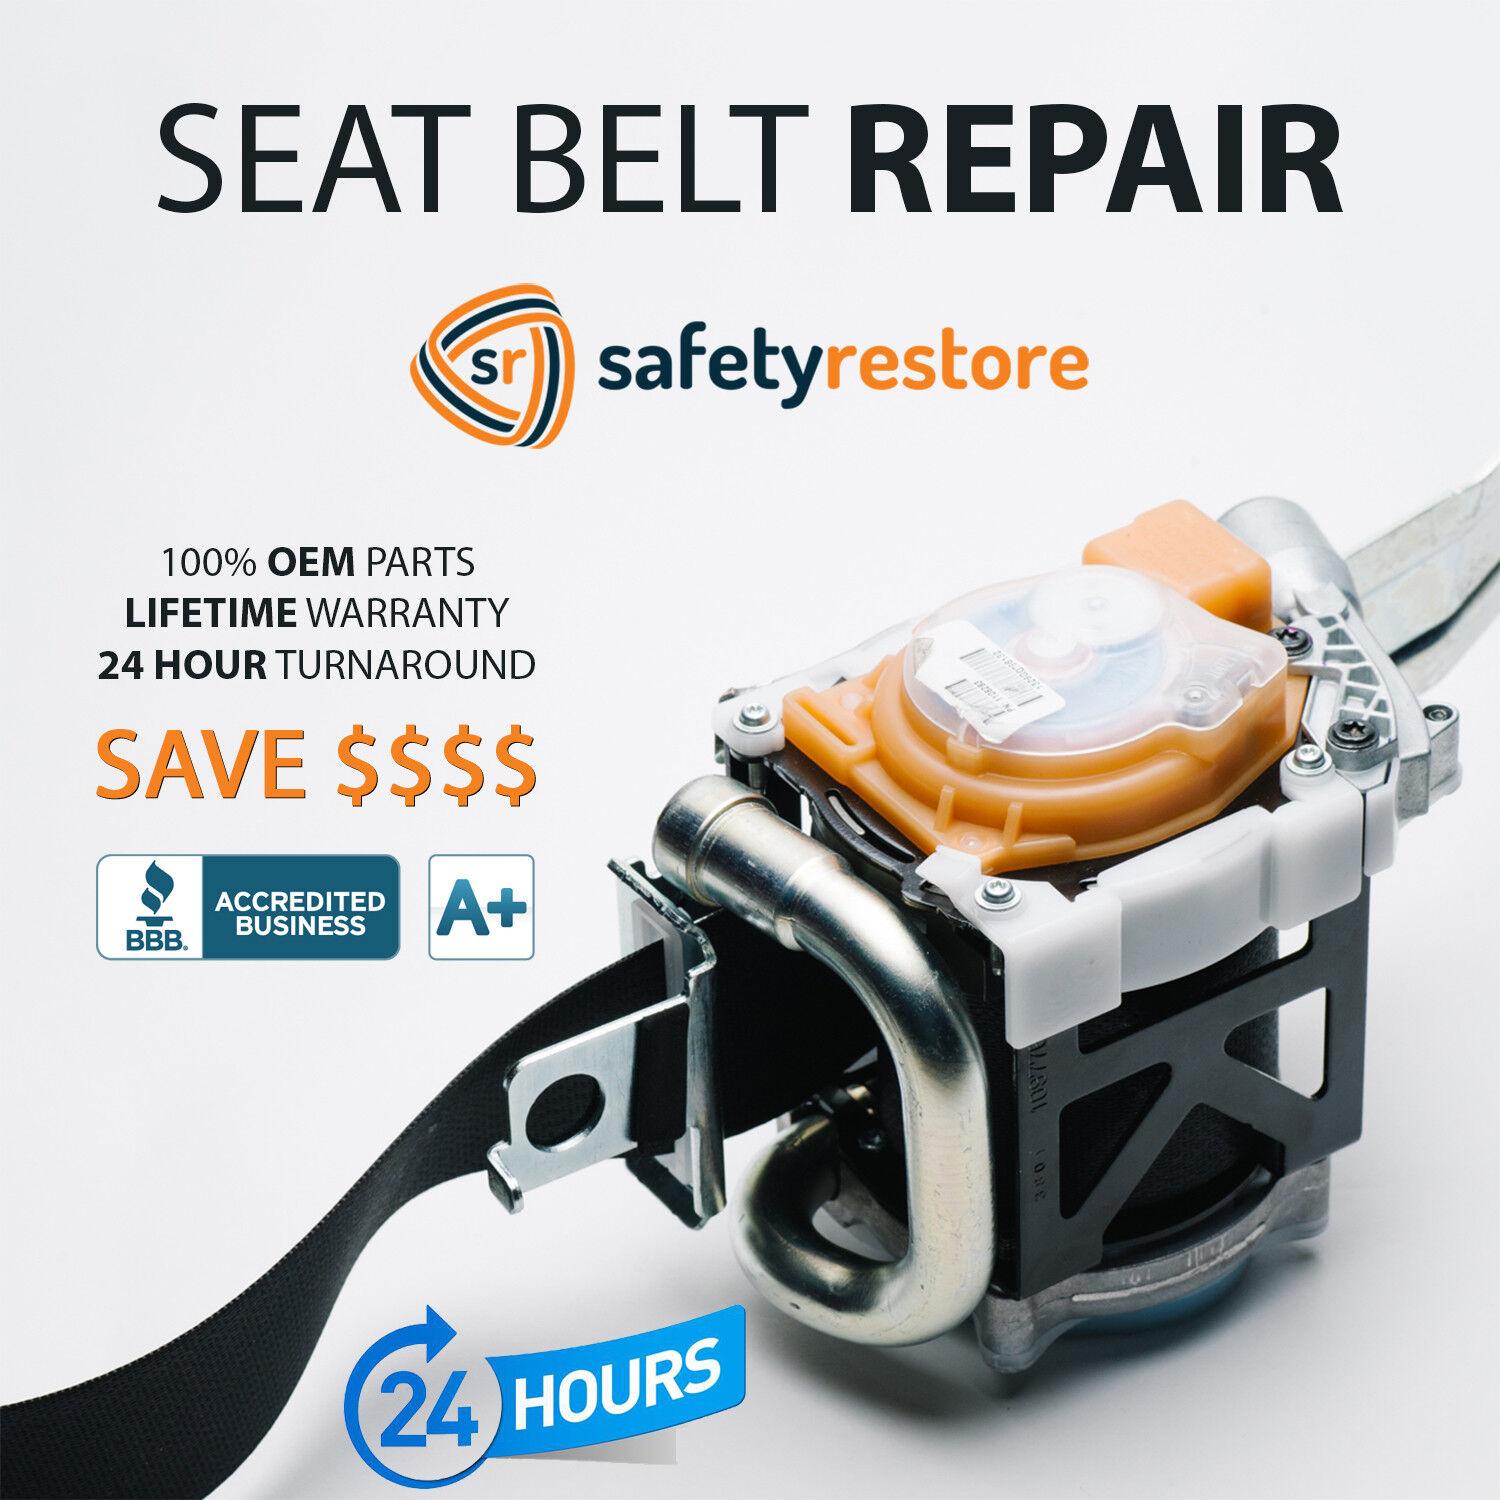 For DUAL STAGE SEAT BELT REPAIR OEM ALL MAKES & MODELS - SAFETY RESTORE